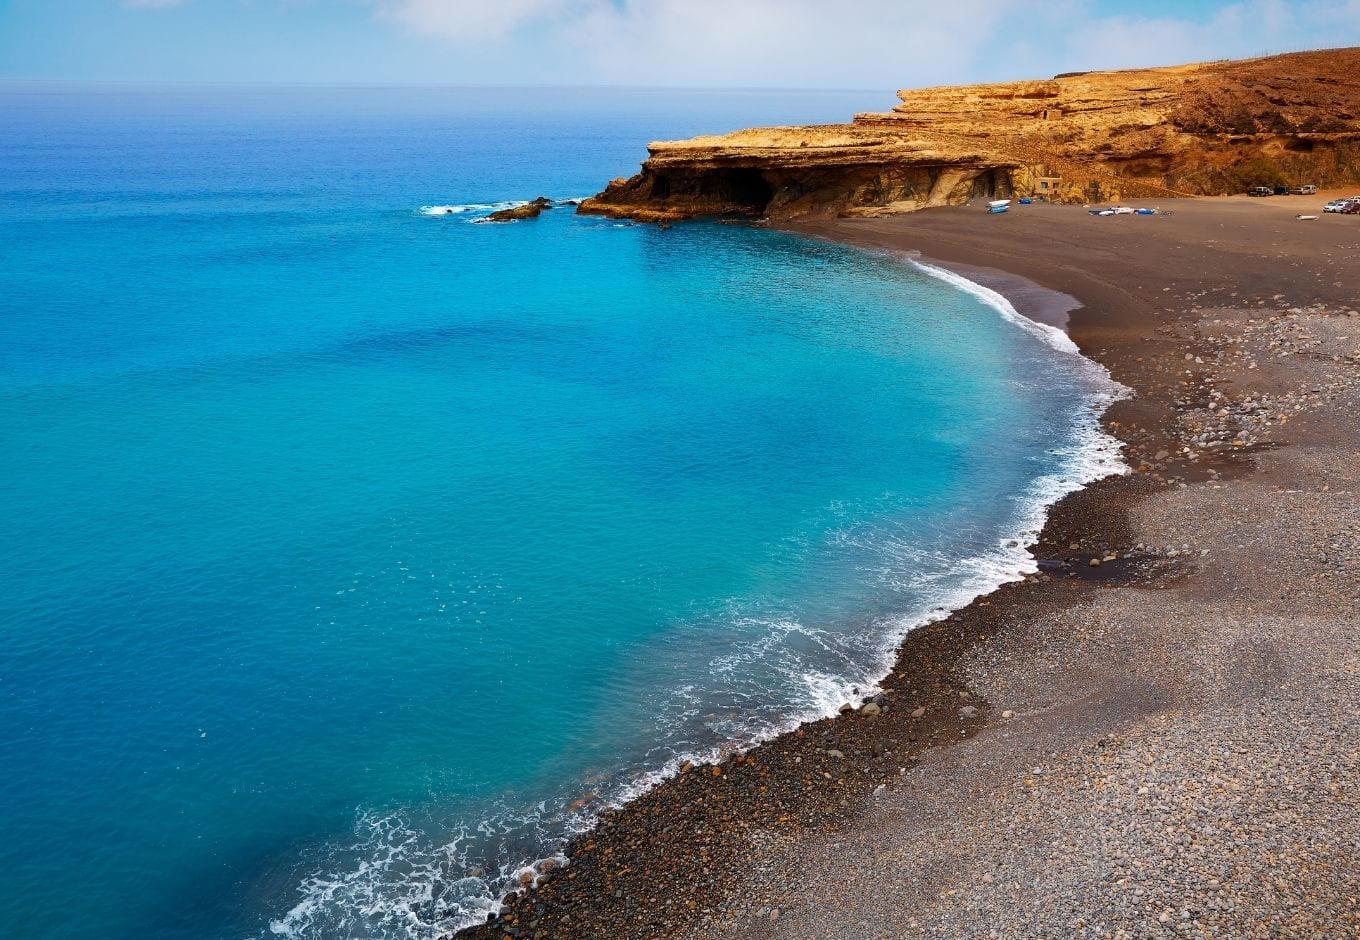 The turquoise-blue ocean in the Canary Islands, Spain.